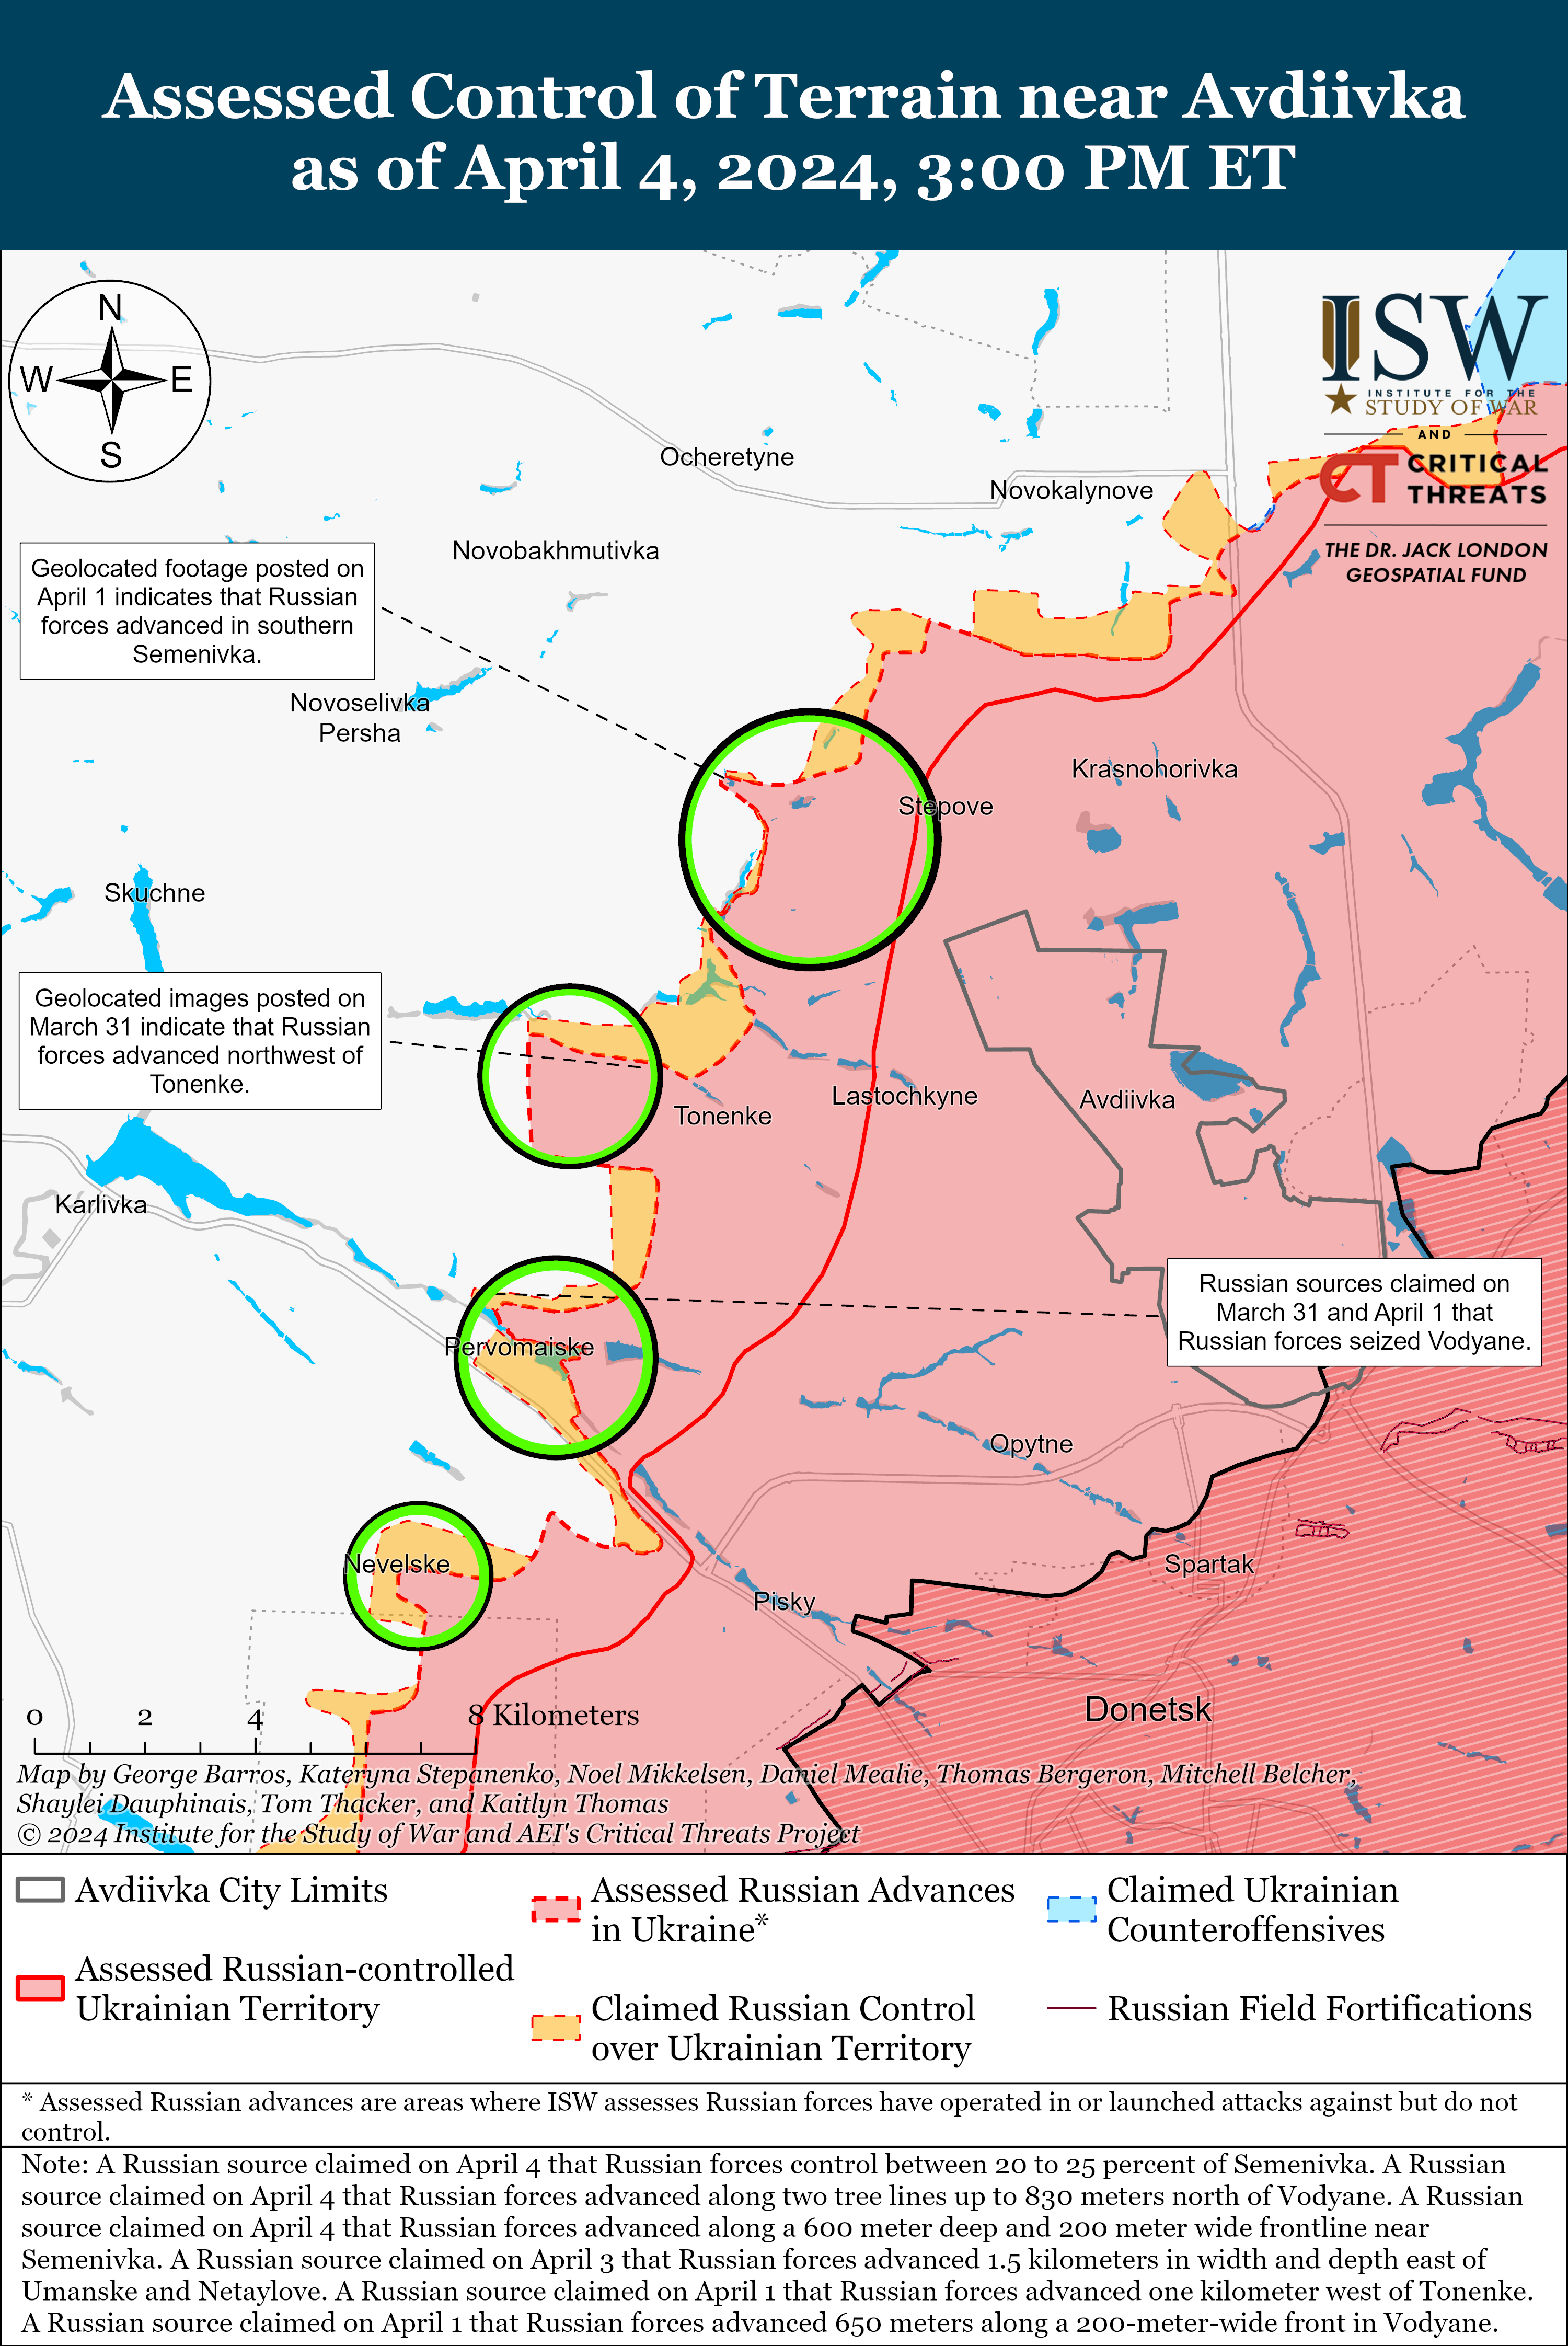 West_of_Avdiivka_Battle_Map_Draft_April_4_2024.png